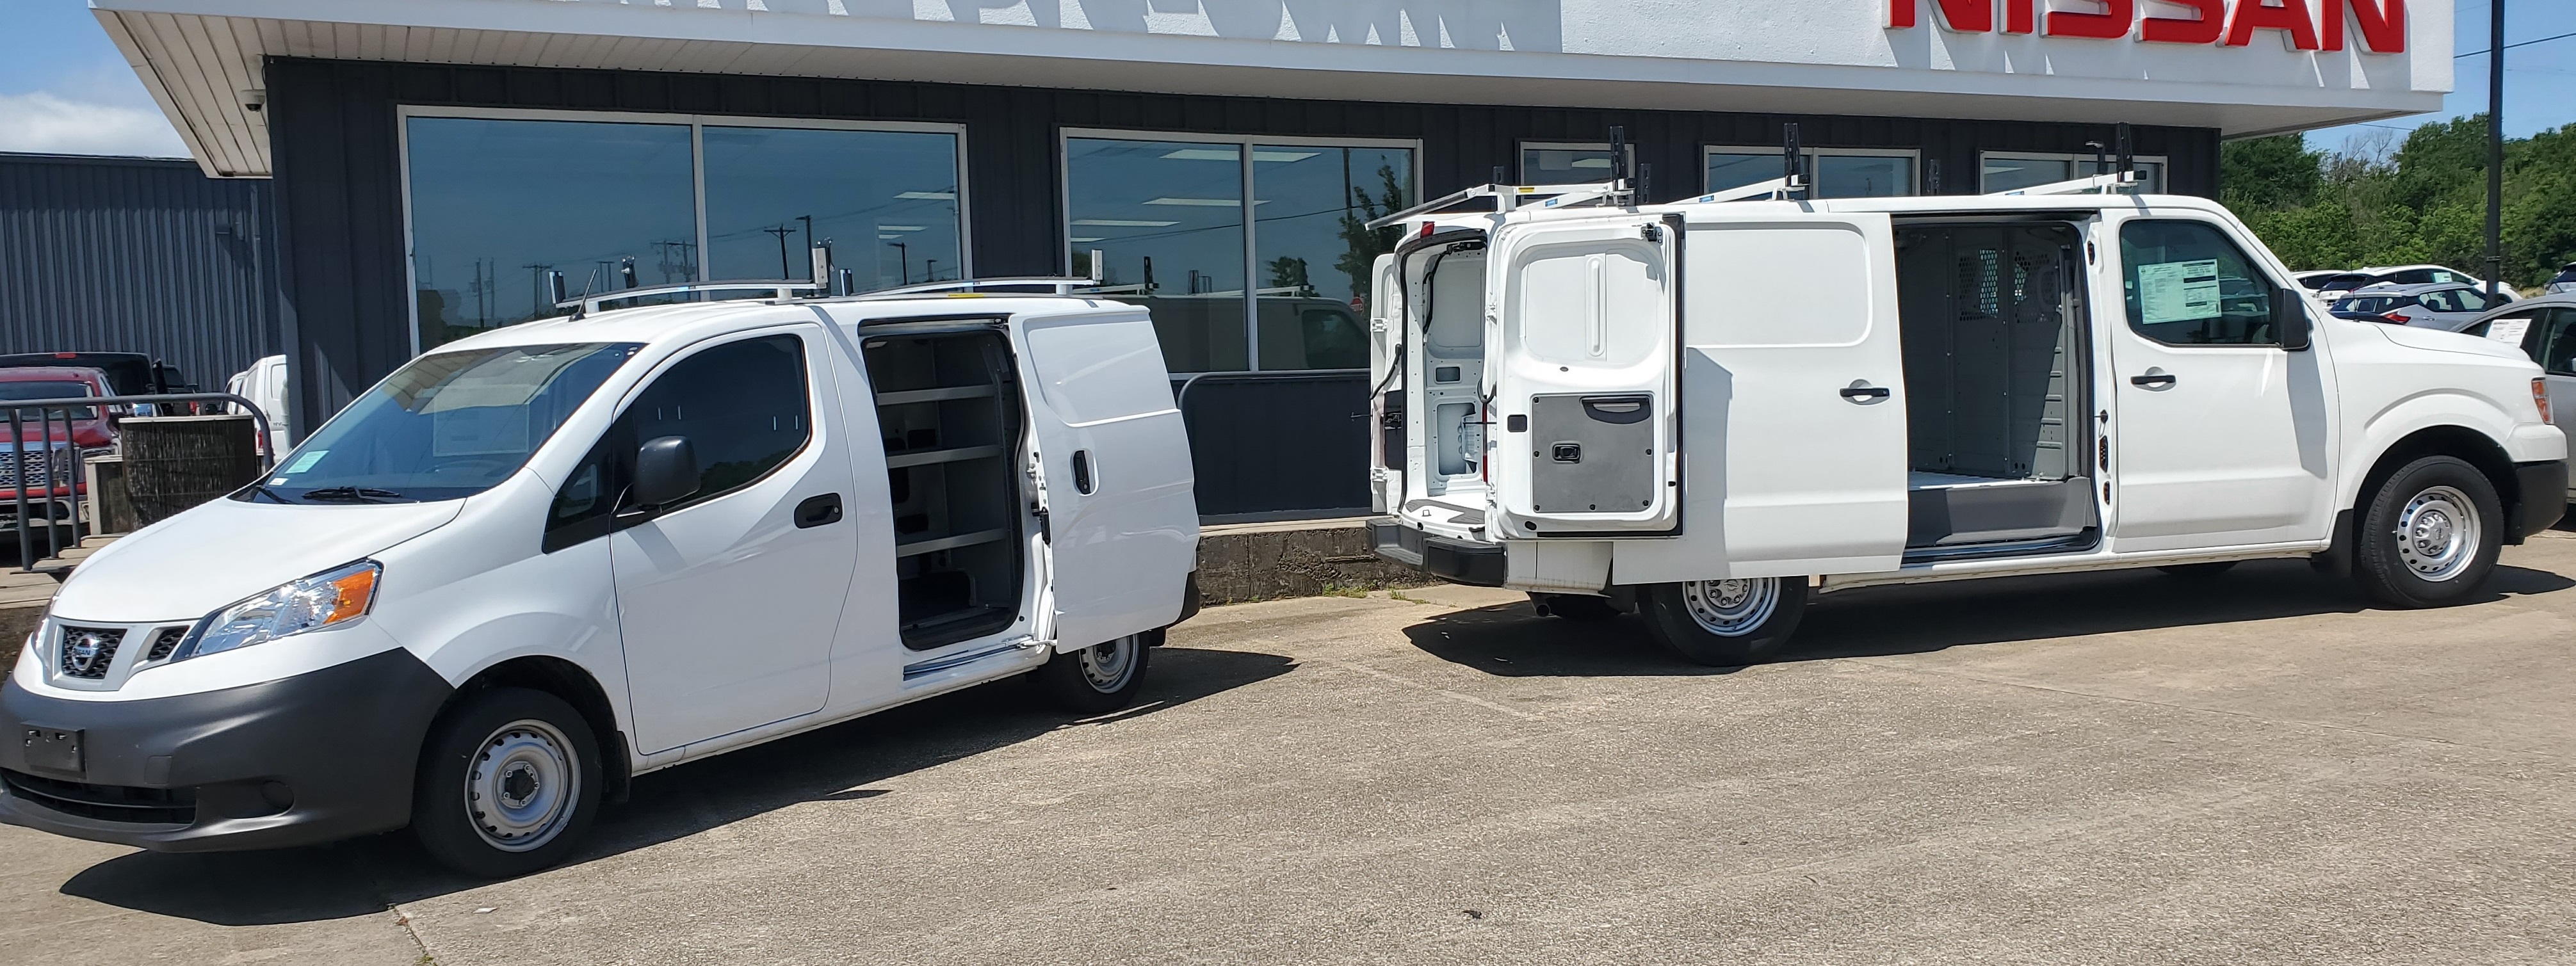 NV200 and NV2500 in front of office